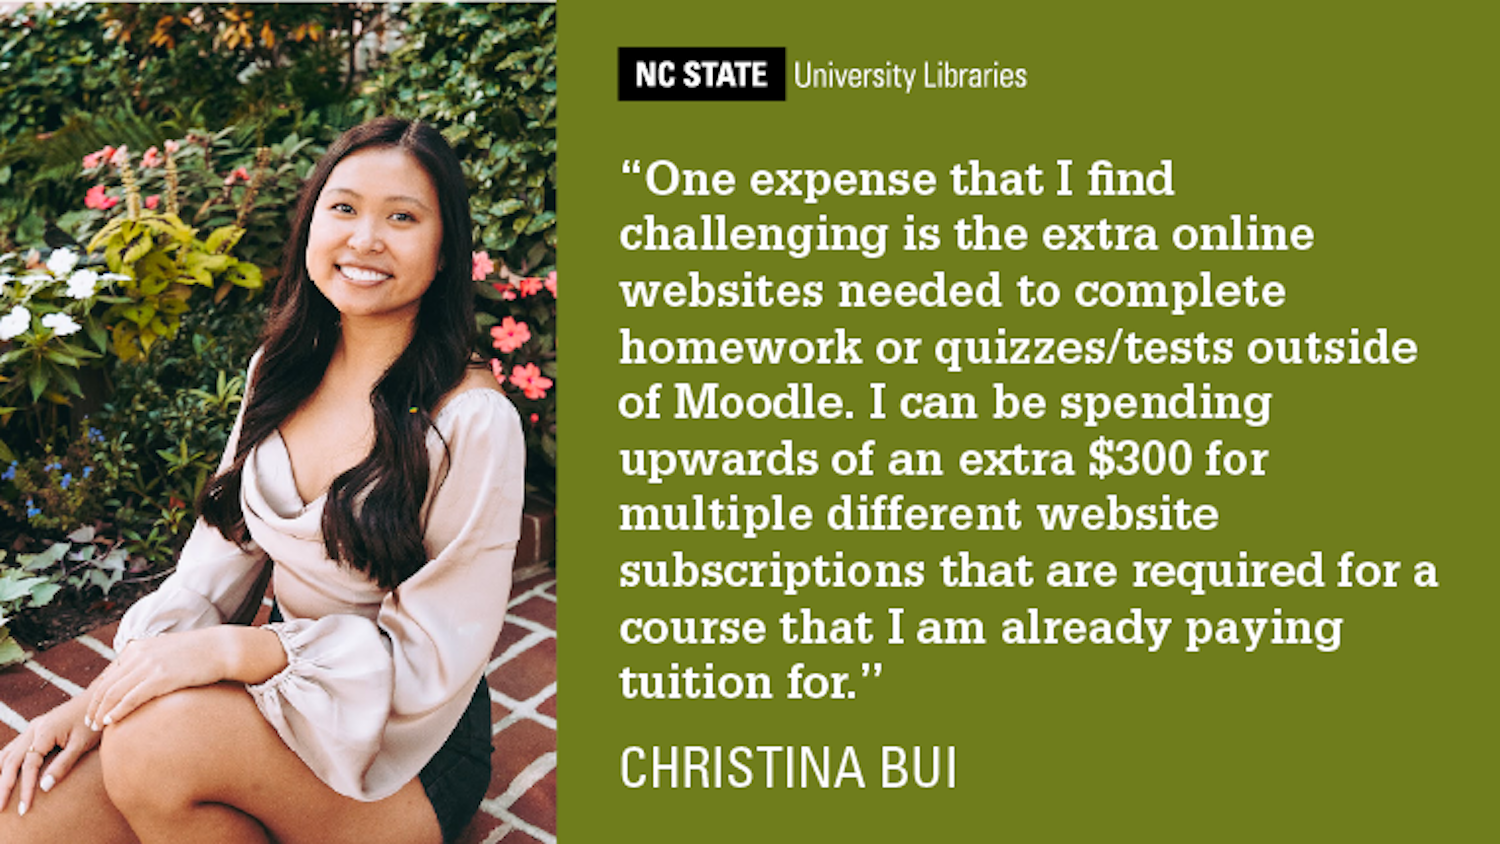 Christina Bui photo and quote